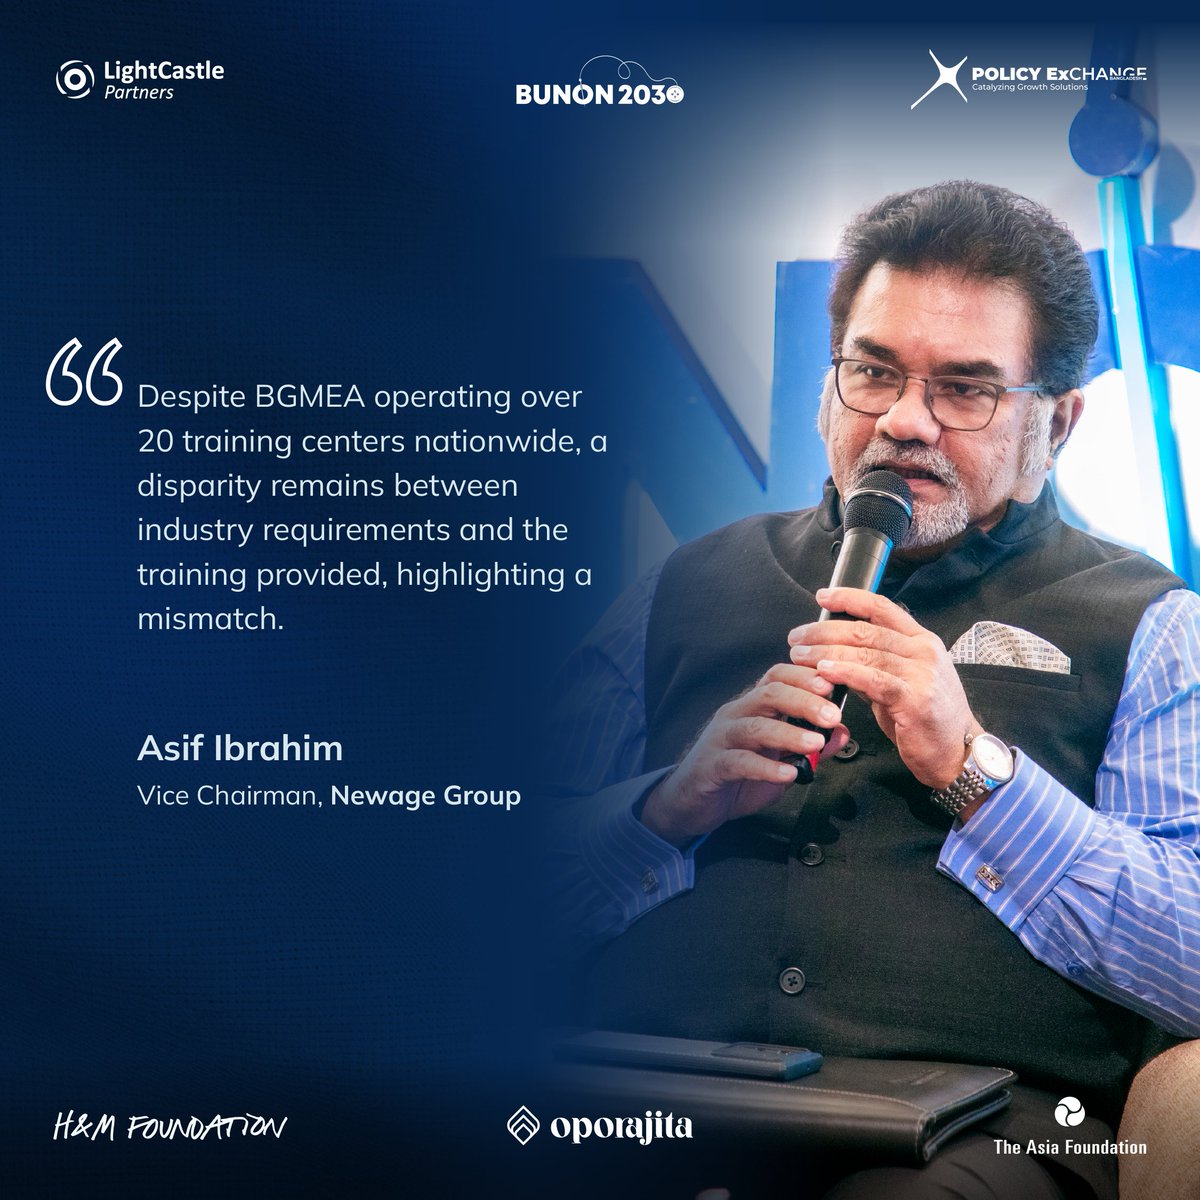 At the second Bunon 2030 dialogue, Asif Ibrahim, Vice Chairman of Newage Group, highlighted the need for alignment between industry requirements and the available training. 

#Bunon2030 #Oporajita #ApparelSector #FutureOfWork #SustainableGrowth #IndustryInsights #WomenEmpowerment